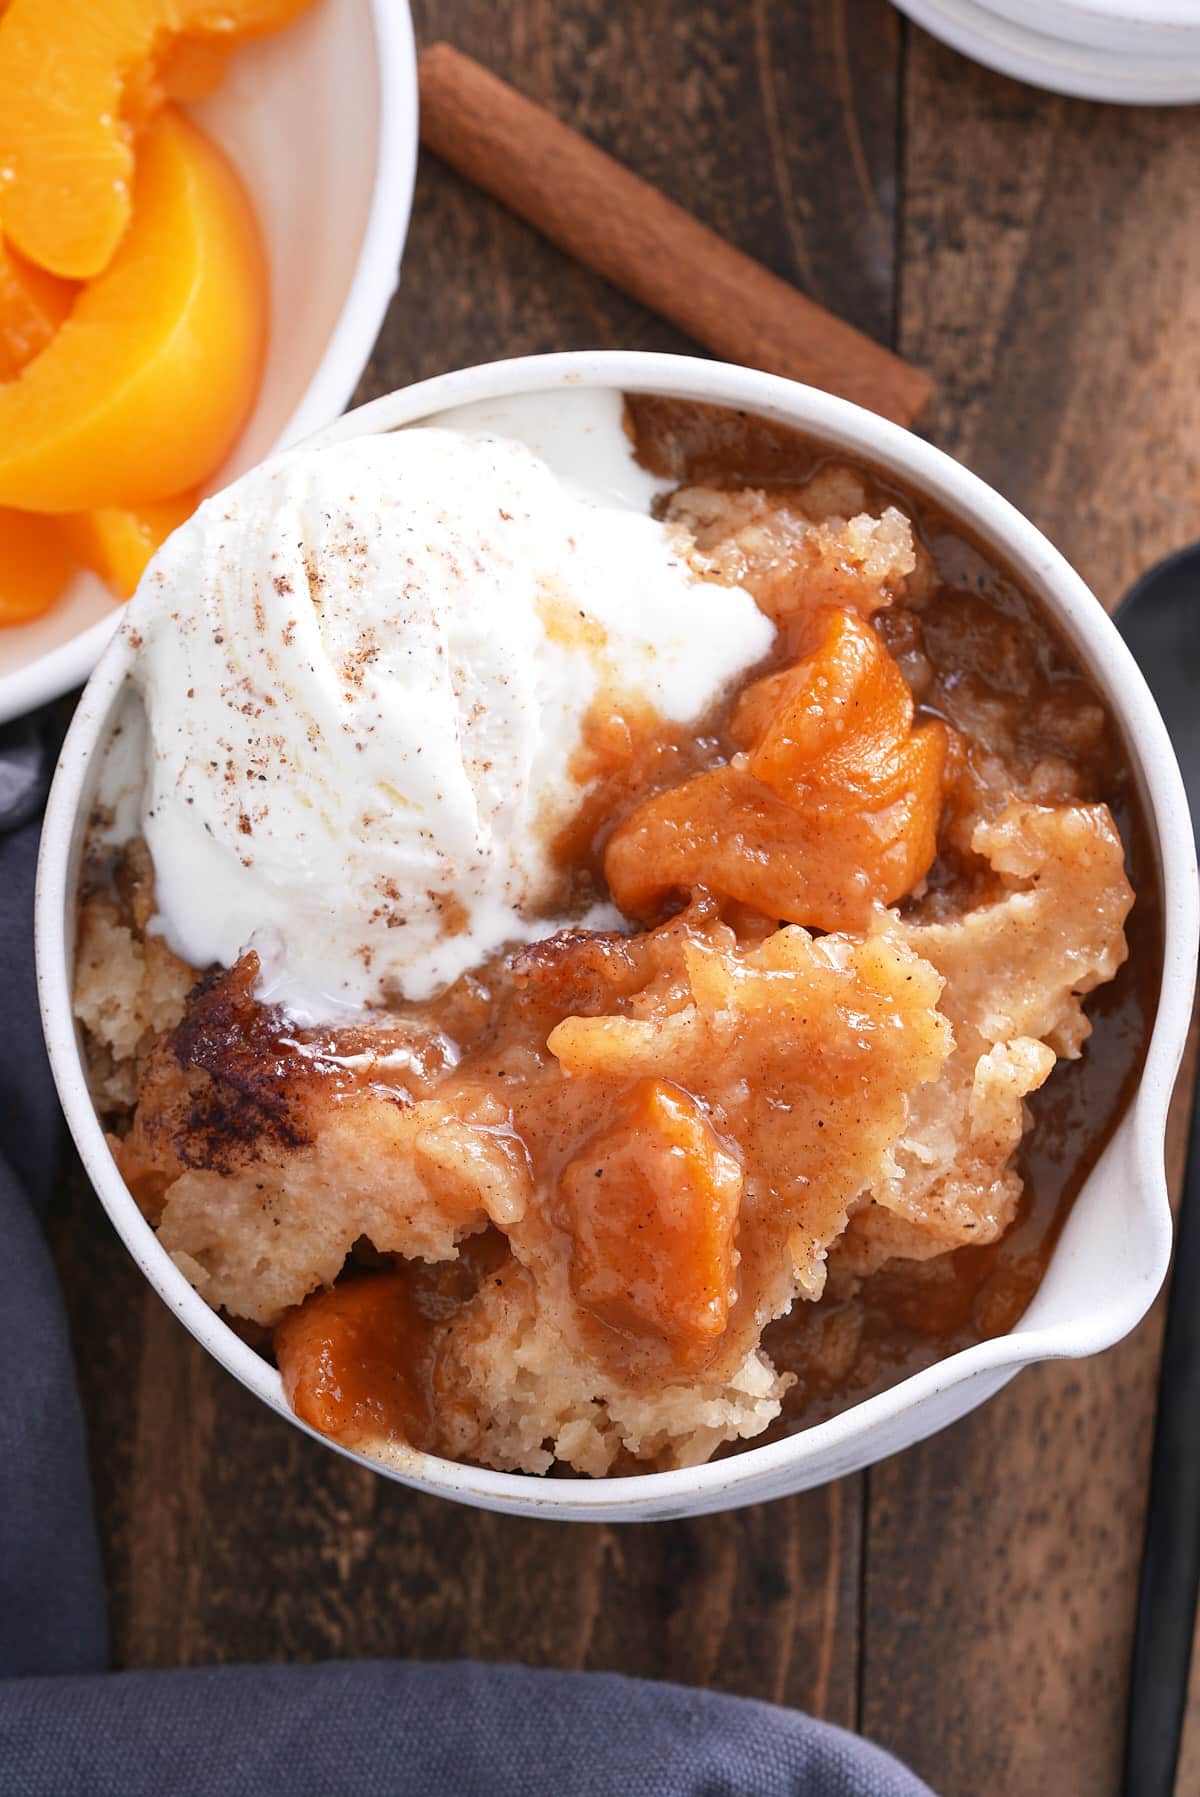 A serving of peach cobbler in a white bowl with ice cream.